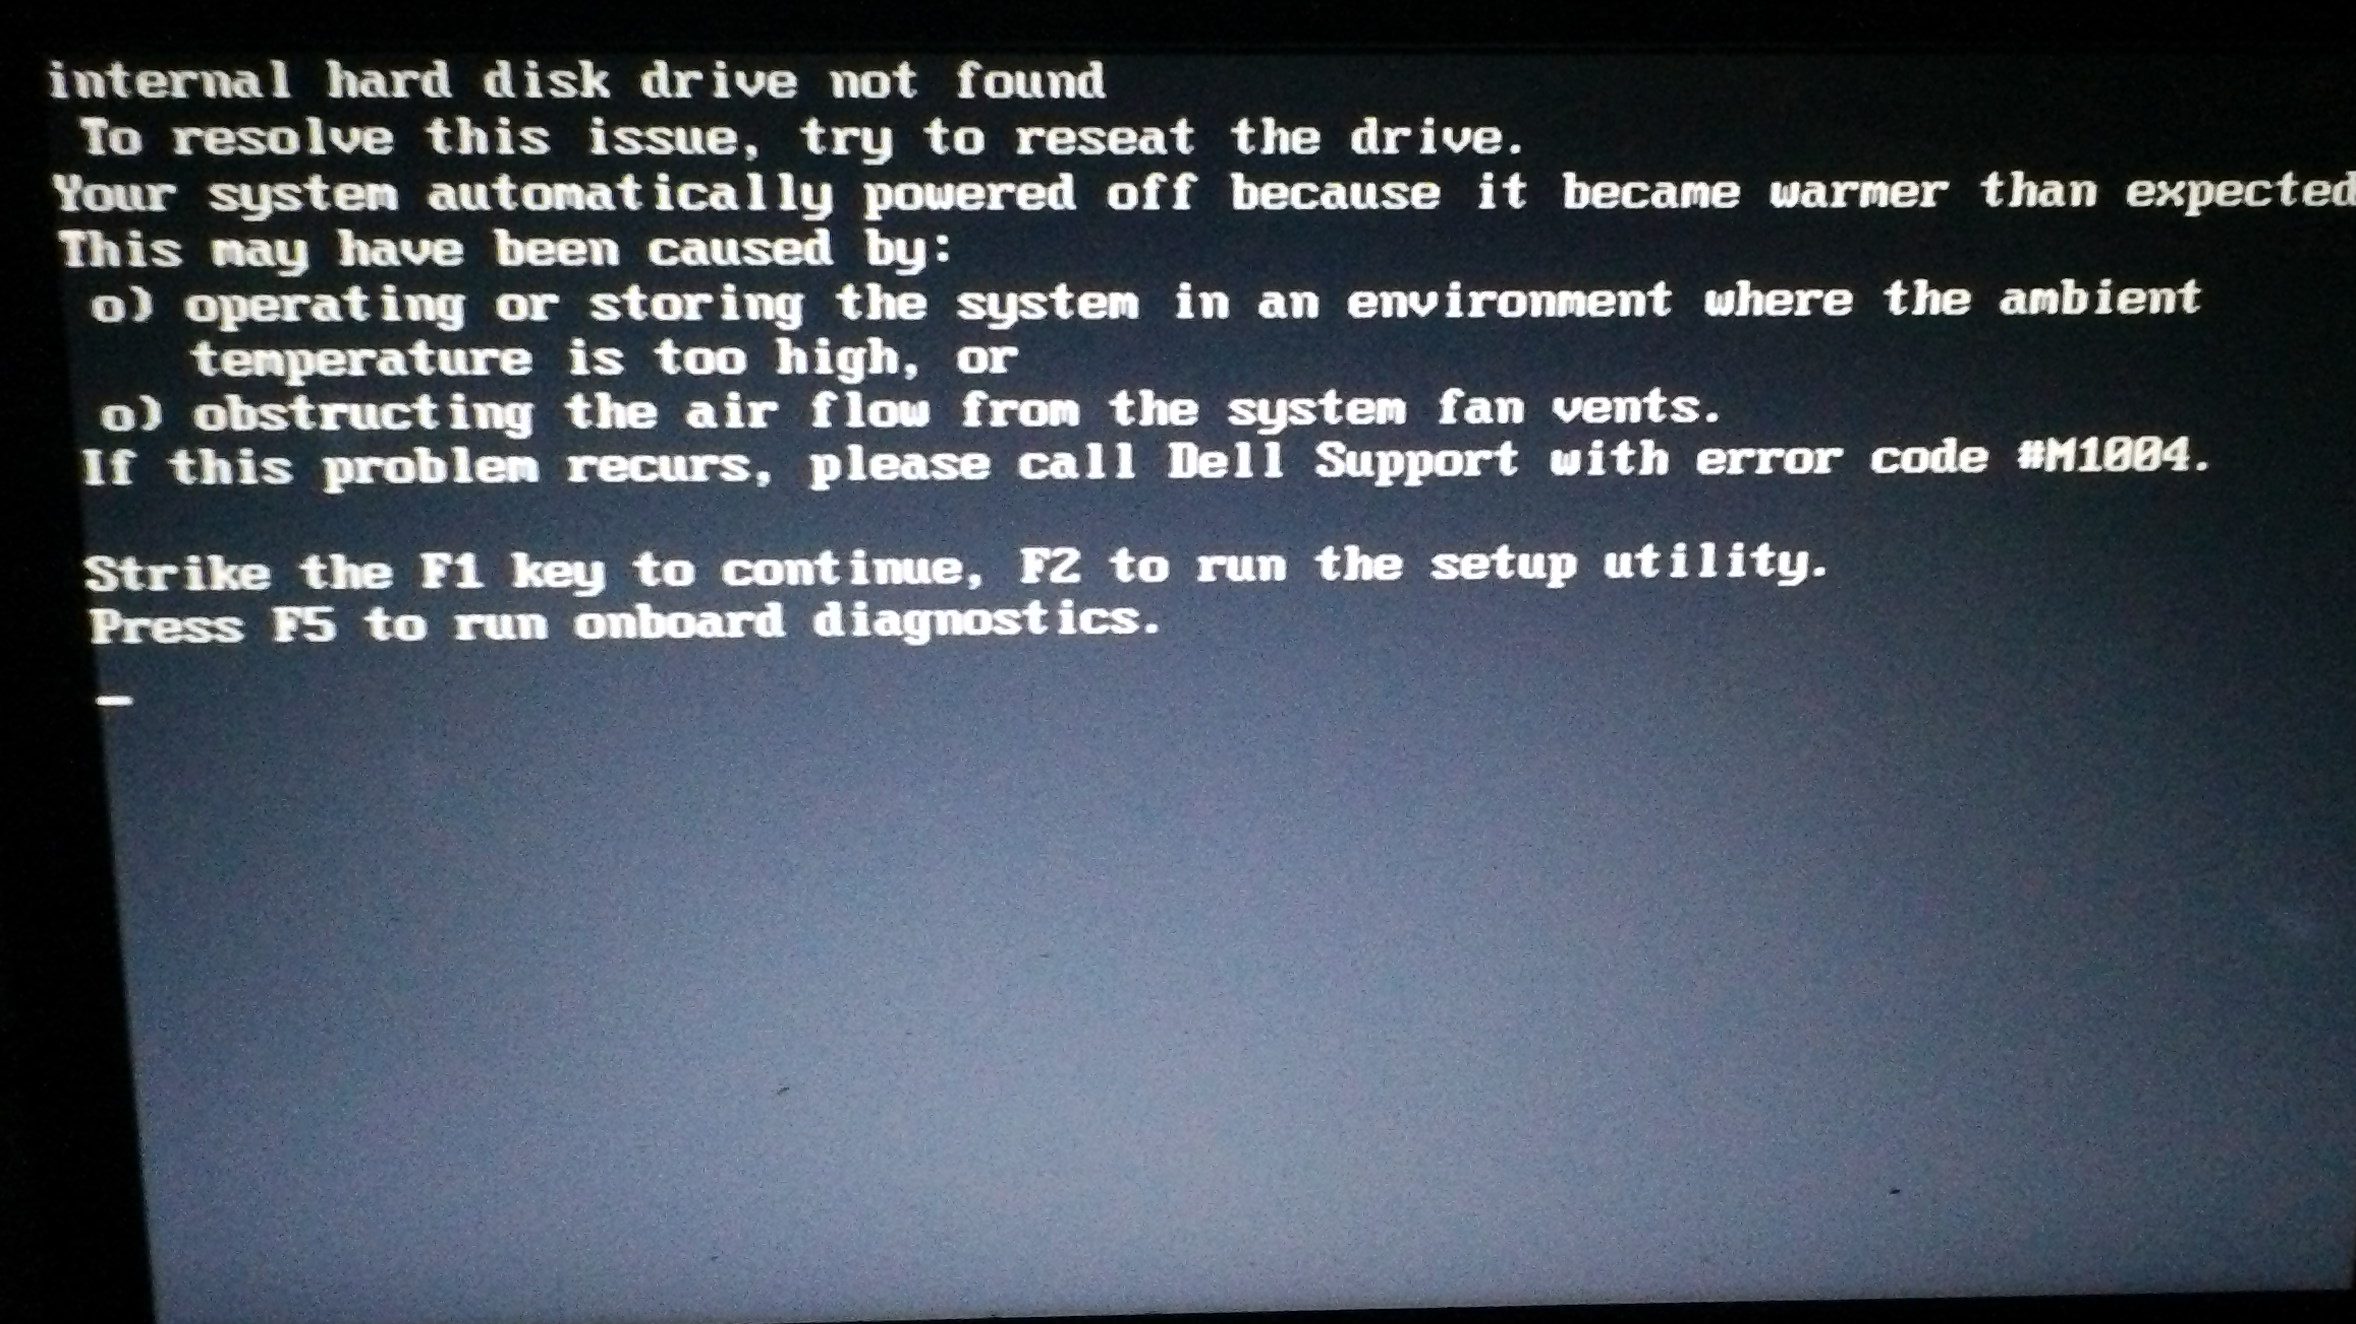 dell not found